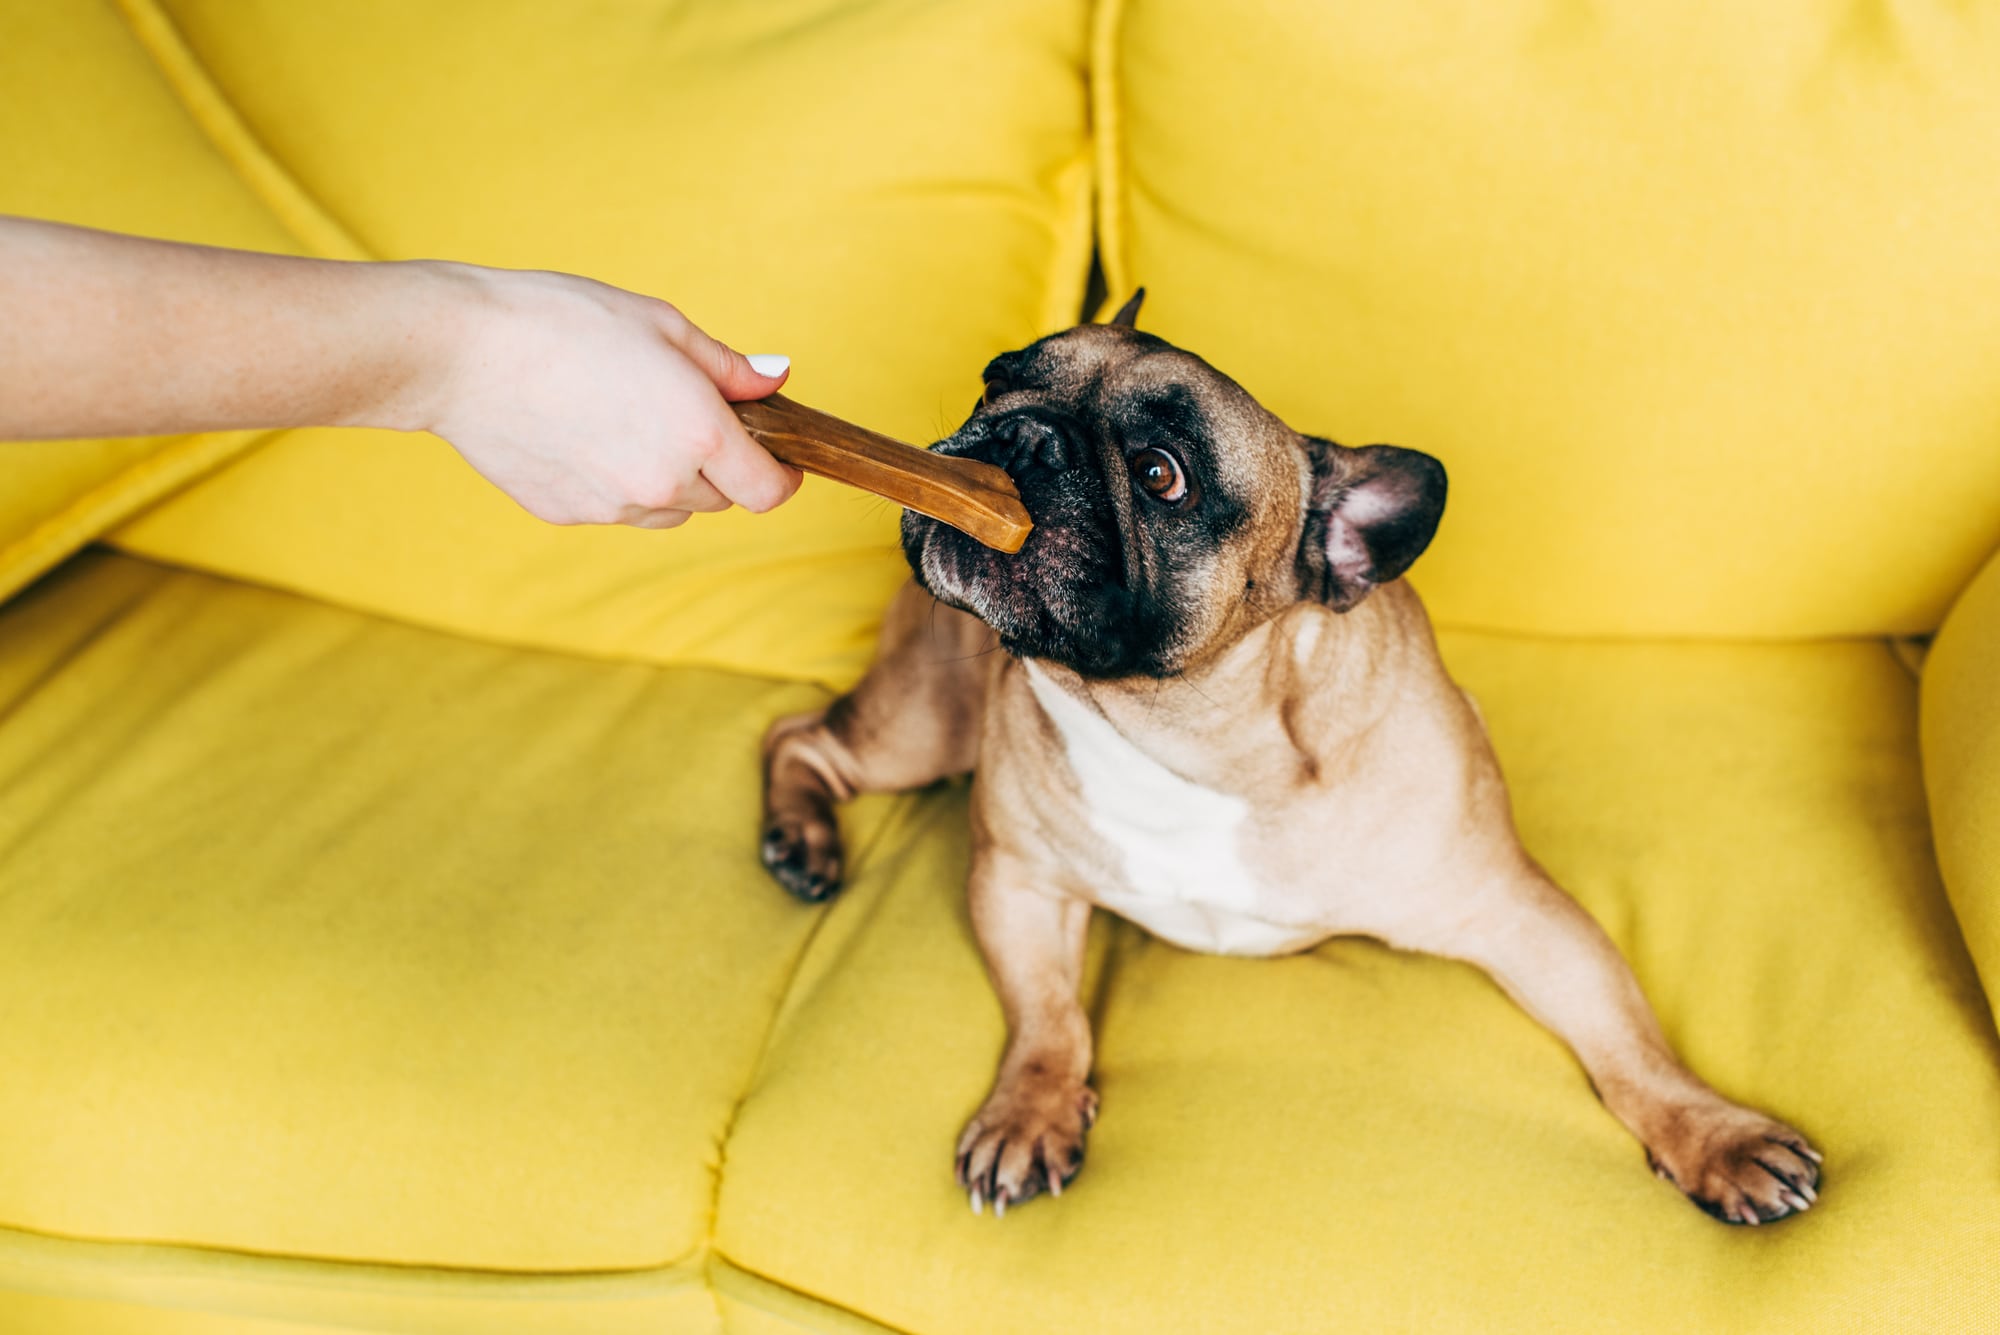 Pet sitting and dog walking small business idea. Picture of a dog eating a treat on a yellow couch